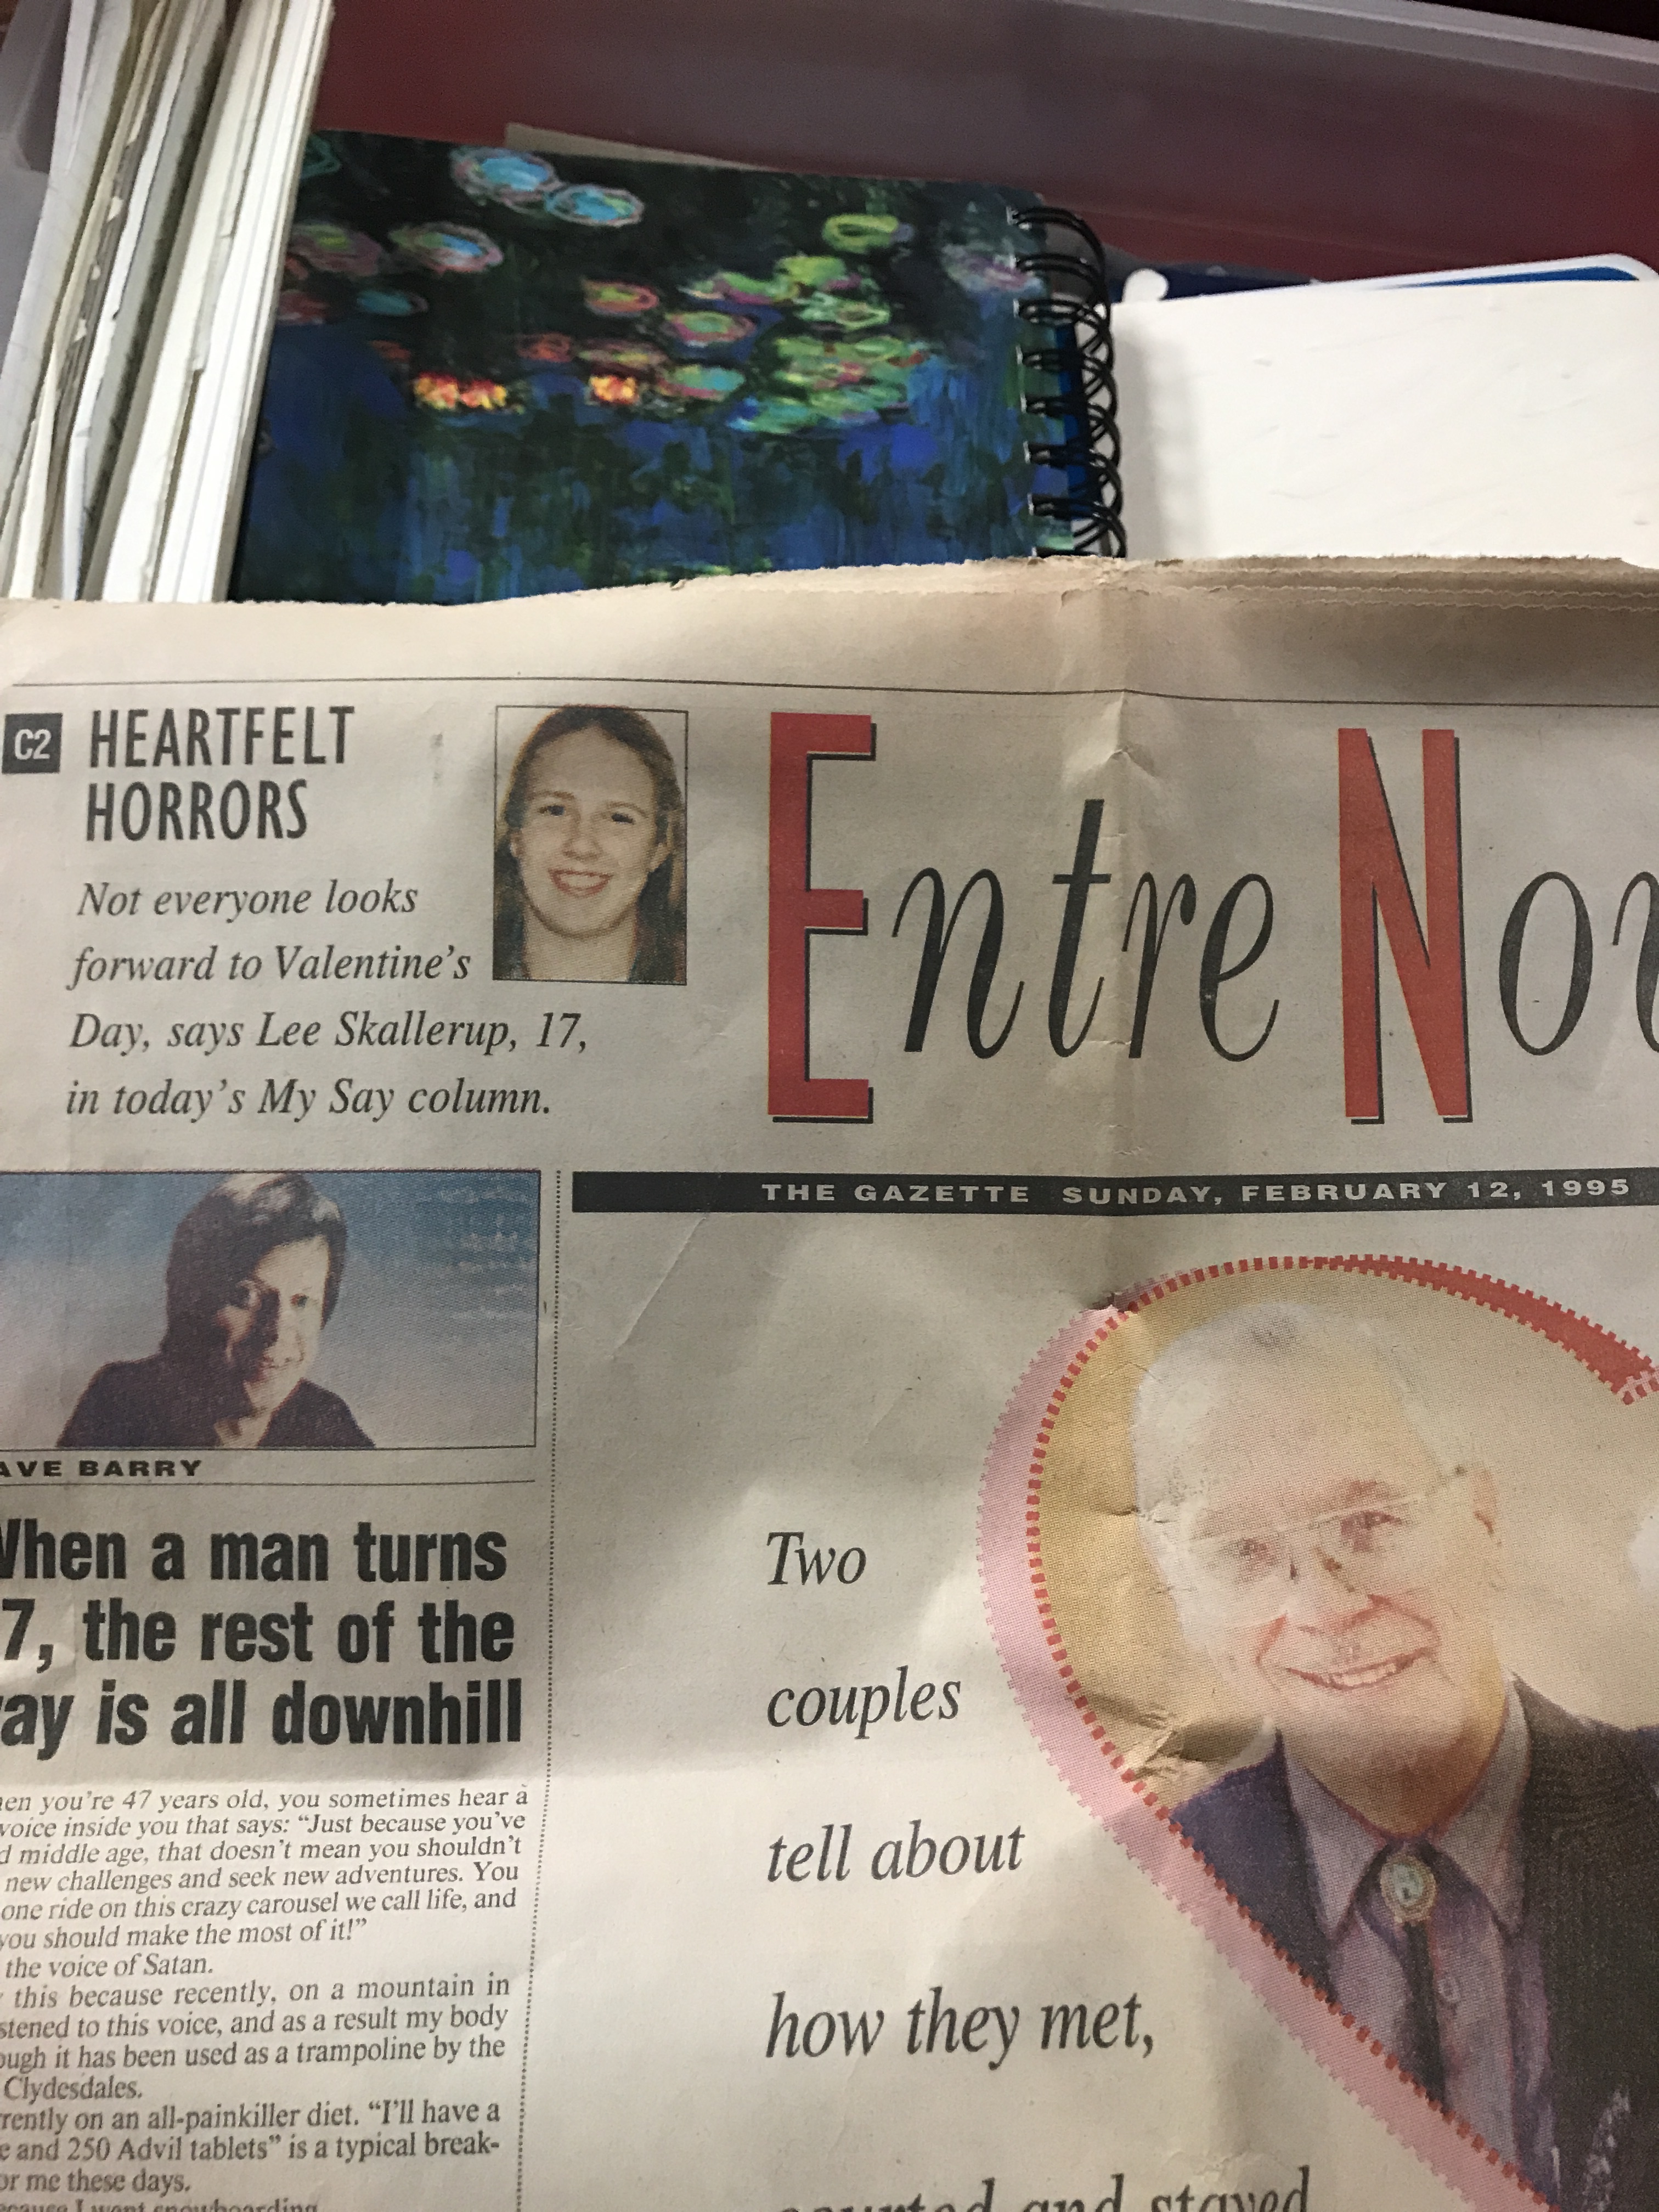 The front page of a newspaper that contains a column the author wrote at 17